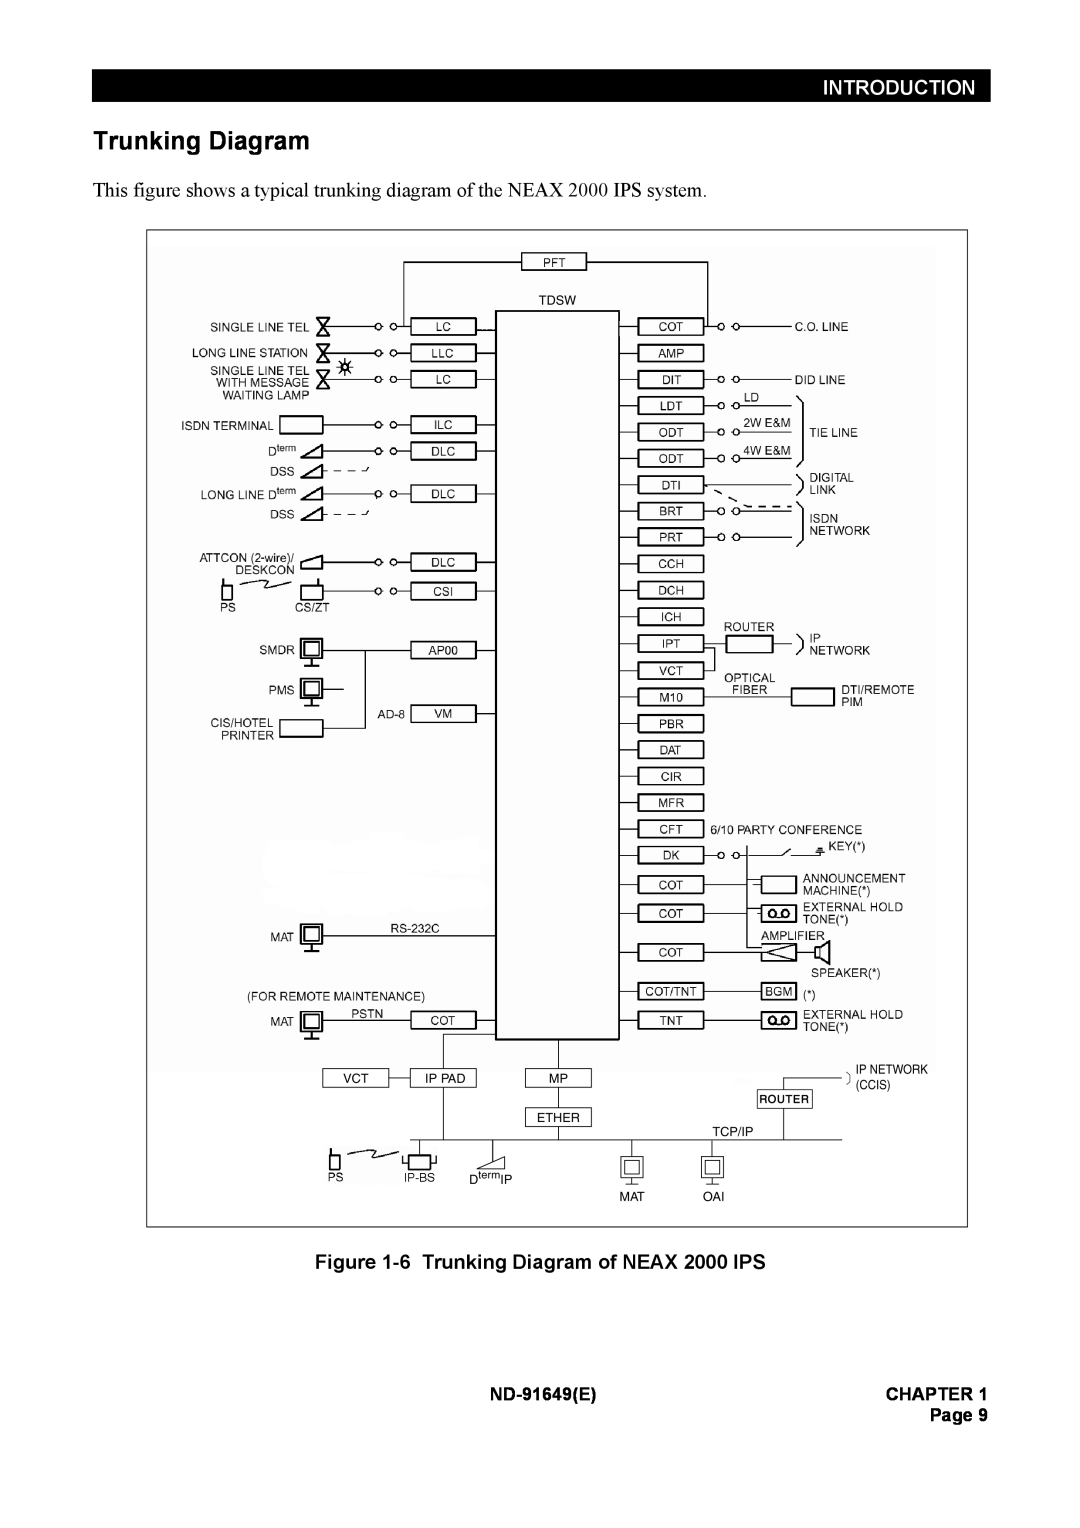 NEC manual Introduction, 6 Trunking Diagram of NEAX 2000 IPS, ND-91649E, Chapter, Page 